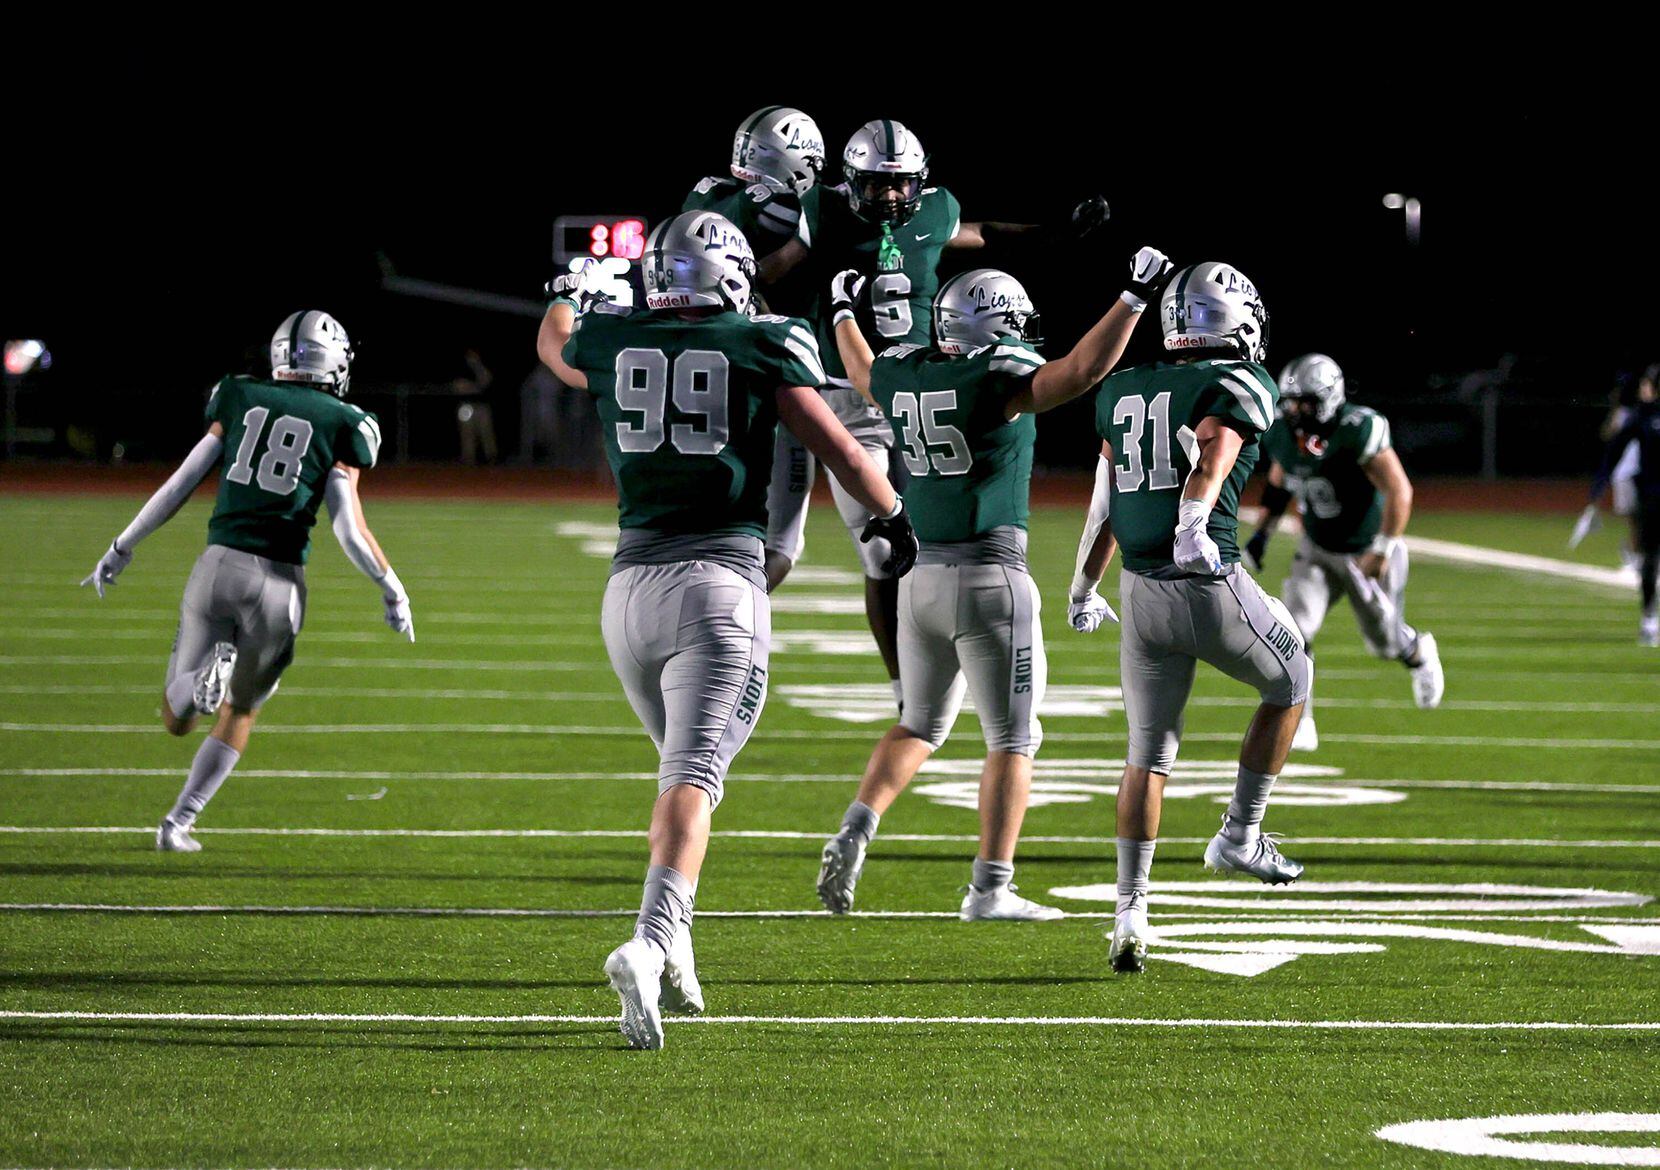 Frisco Reedy celebrates their victory over Frisco Lone Star, 13-7 in a high school football...